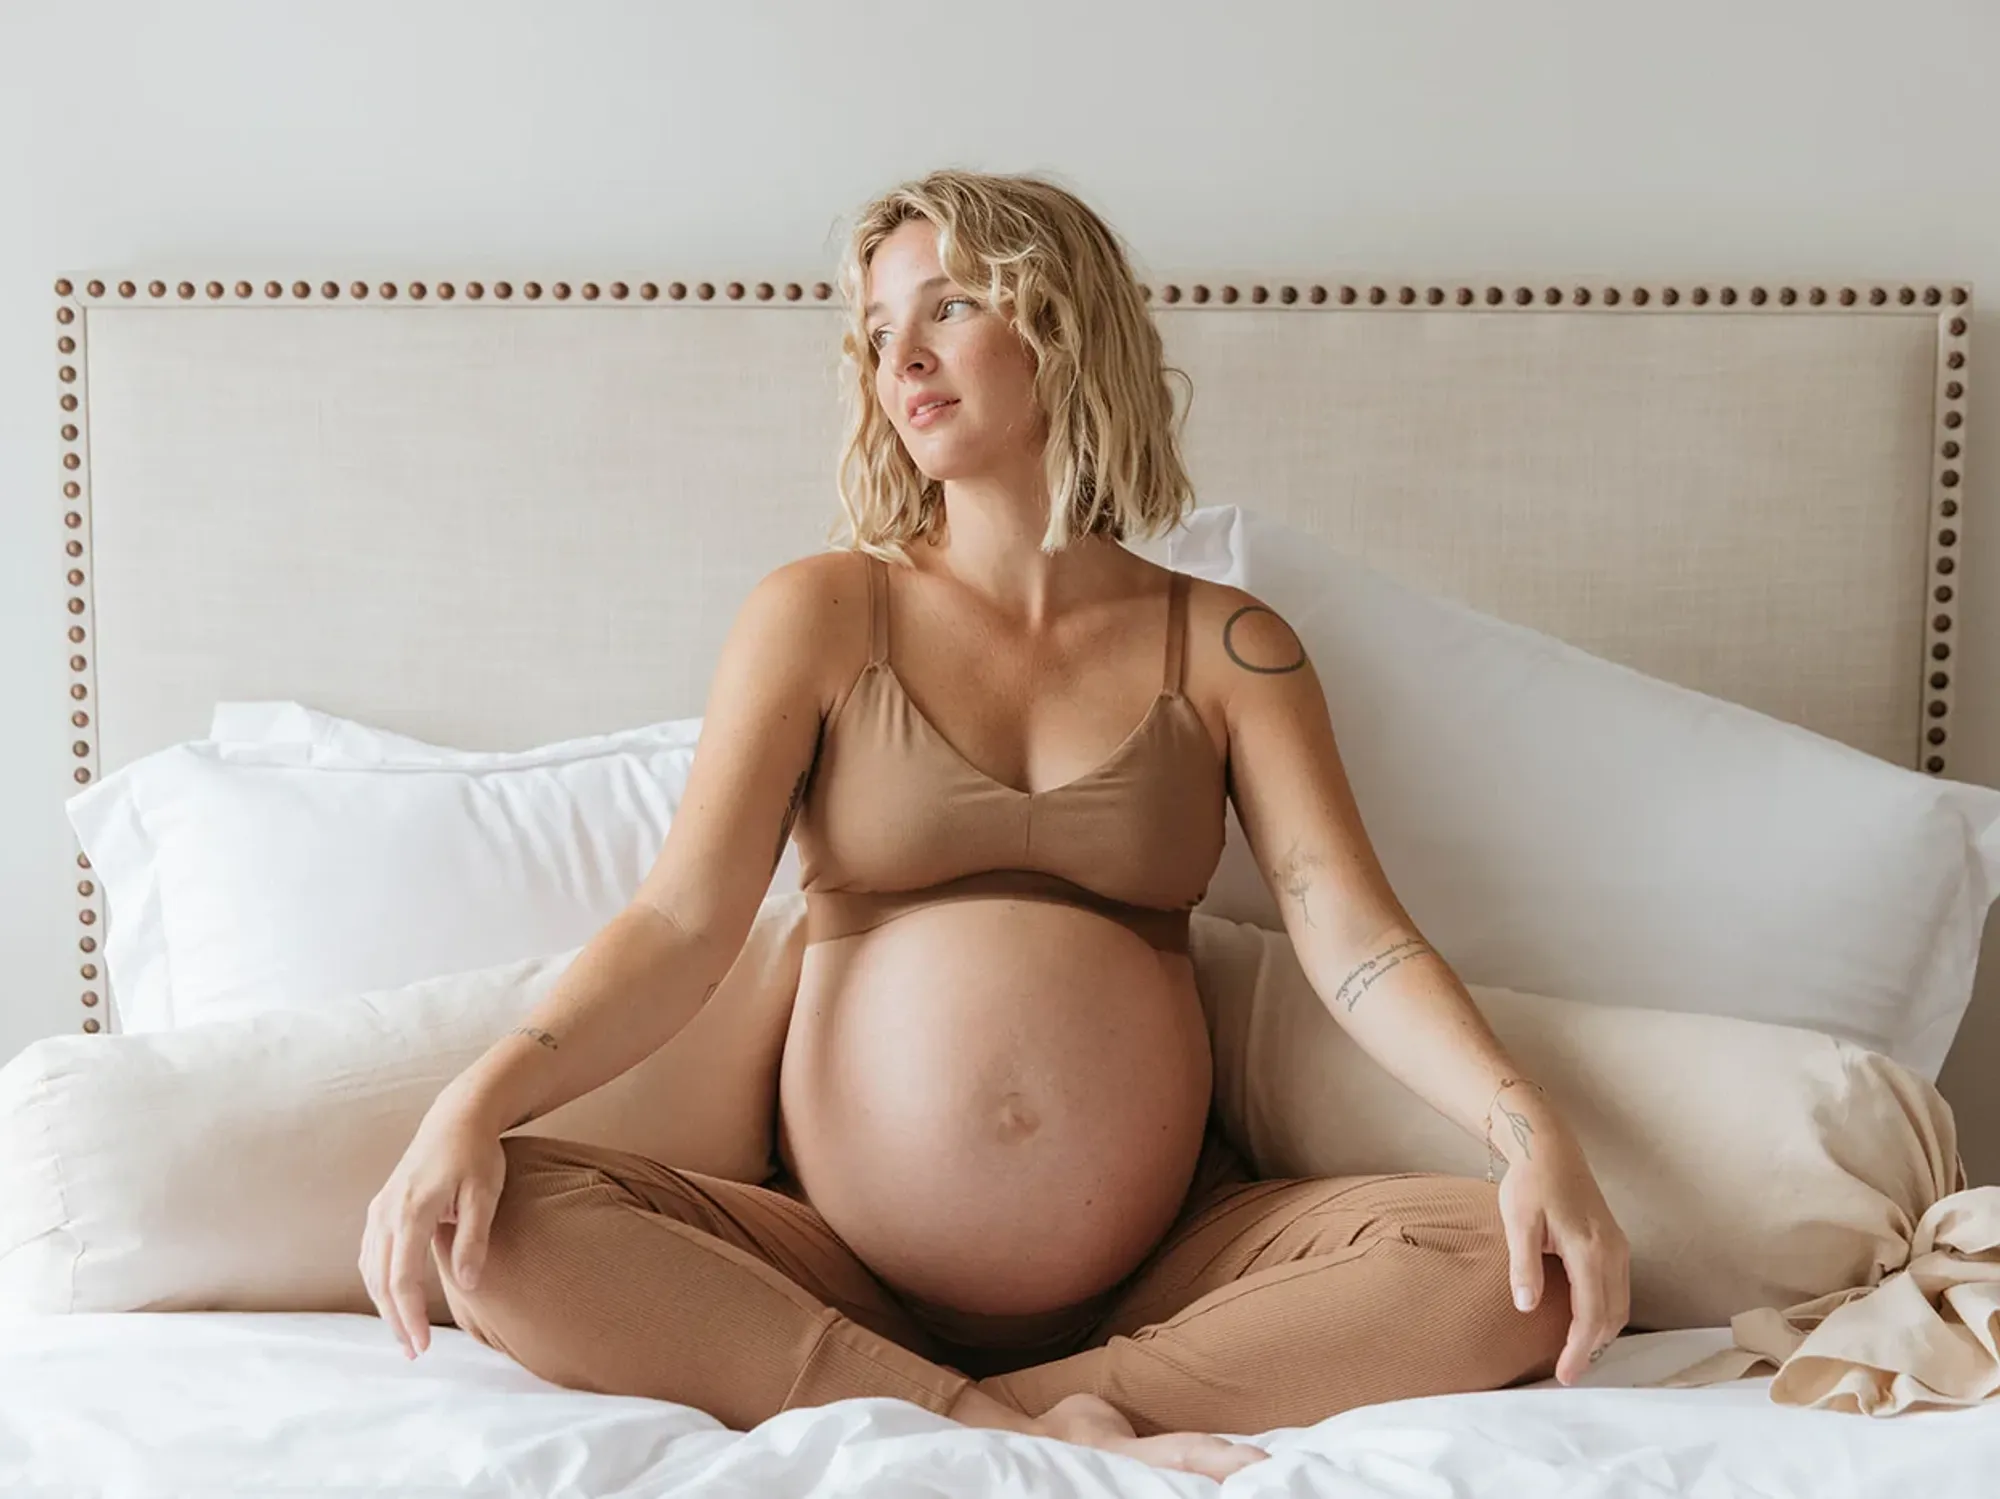 Preserve the beauty of your pregnancy forever with Belly Bowl